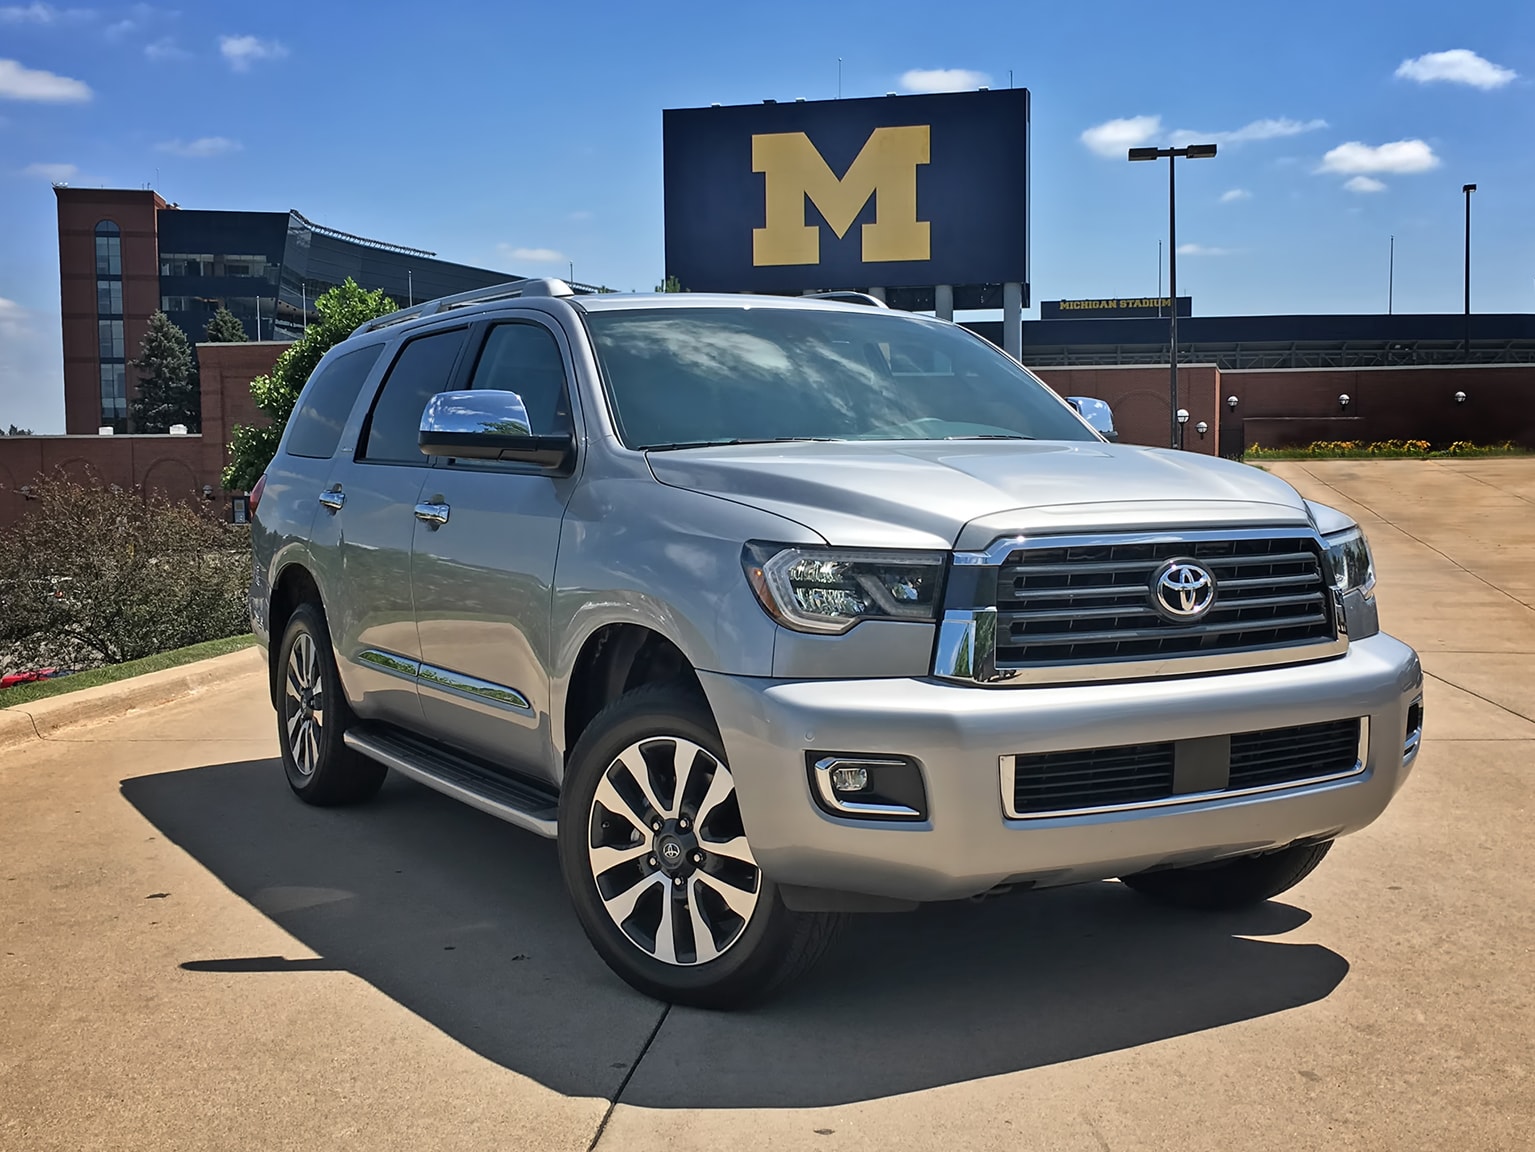 2019 Toyota Sequoia Limited Review: Call It “Experienced”